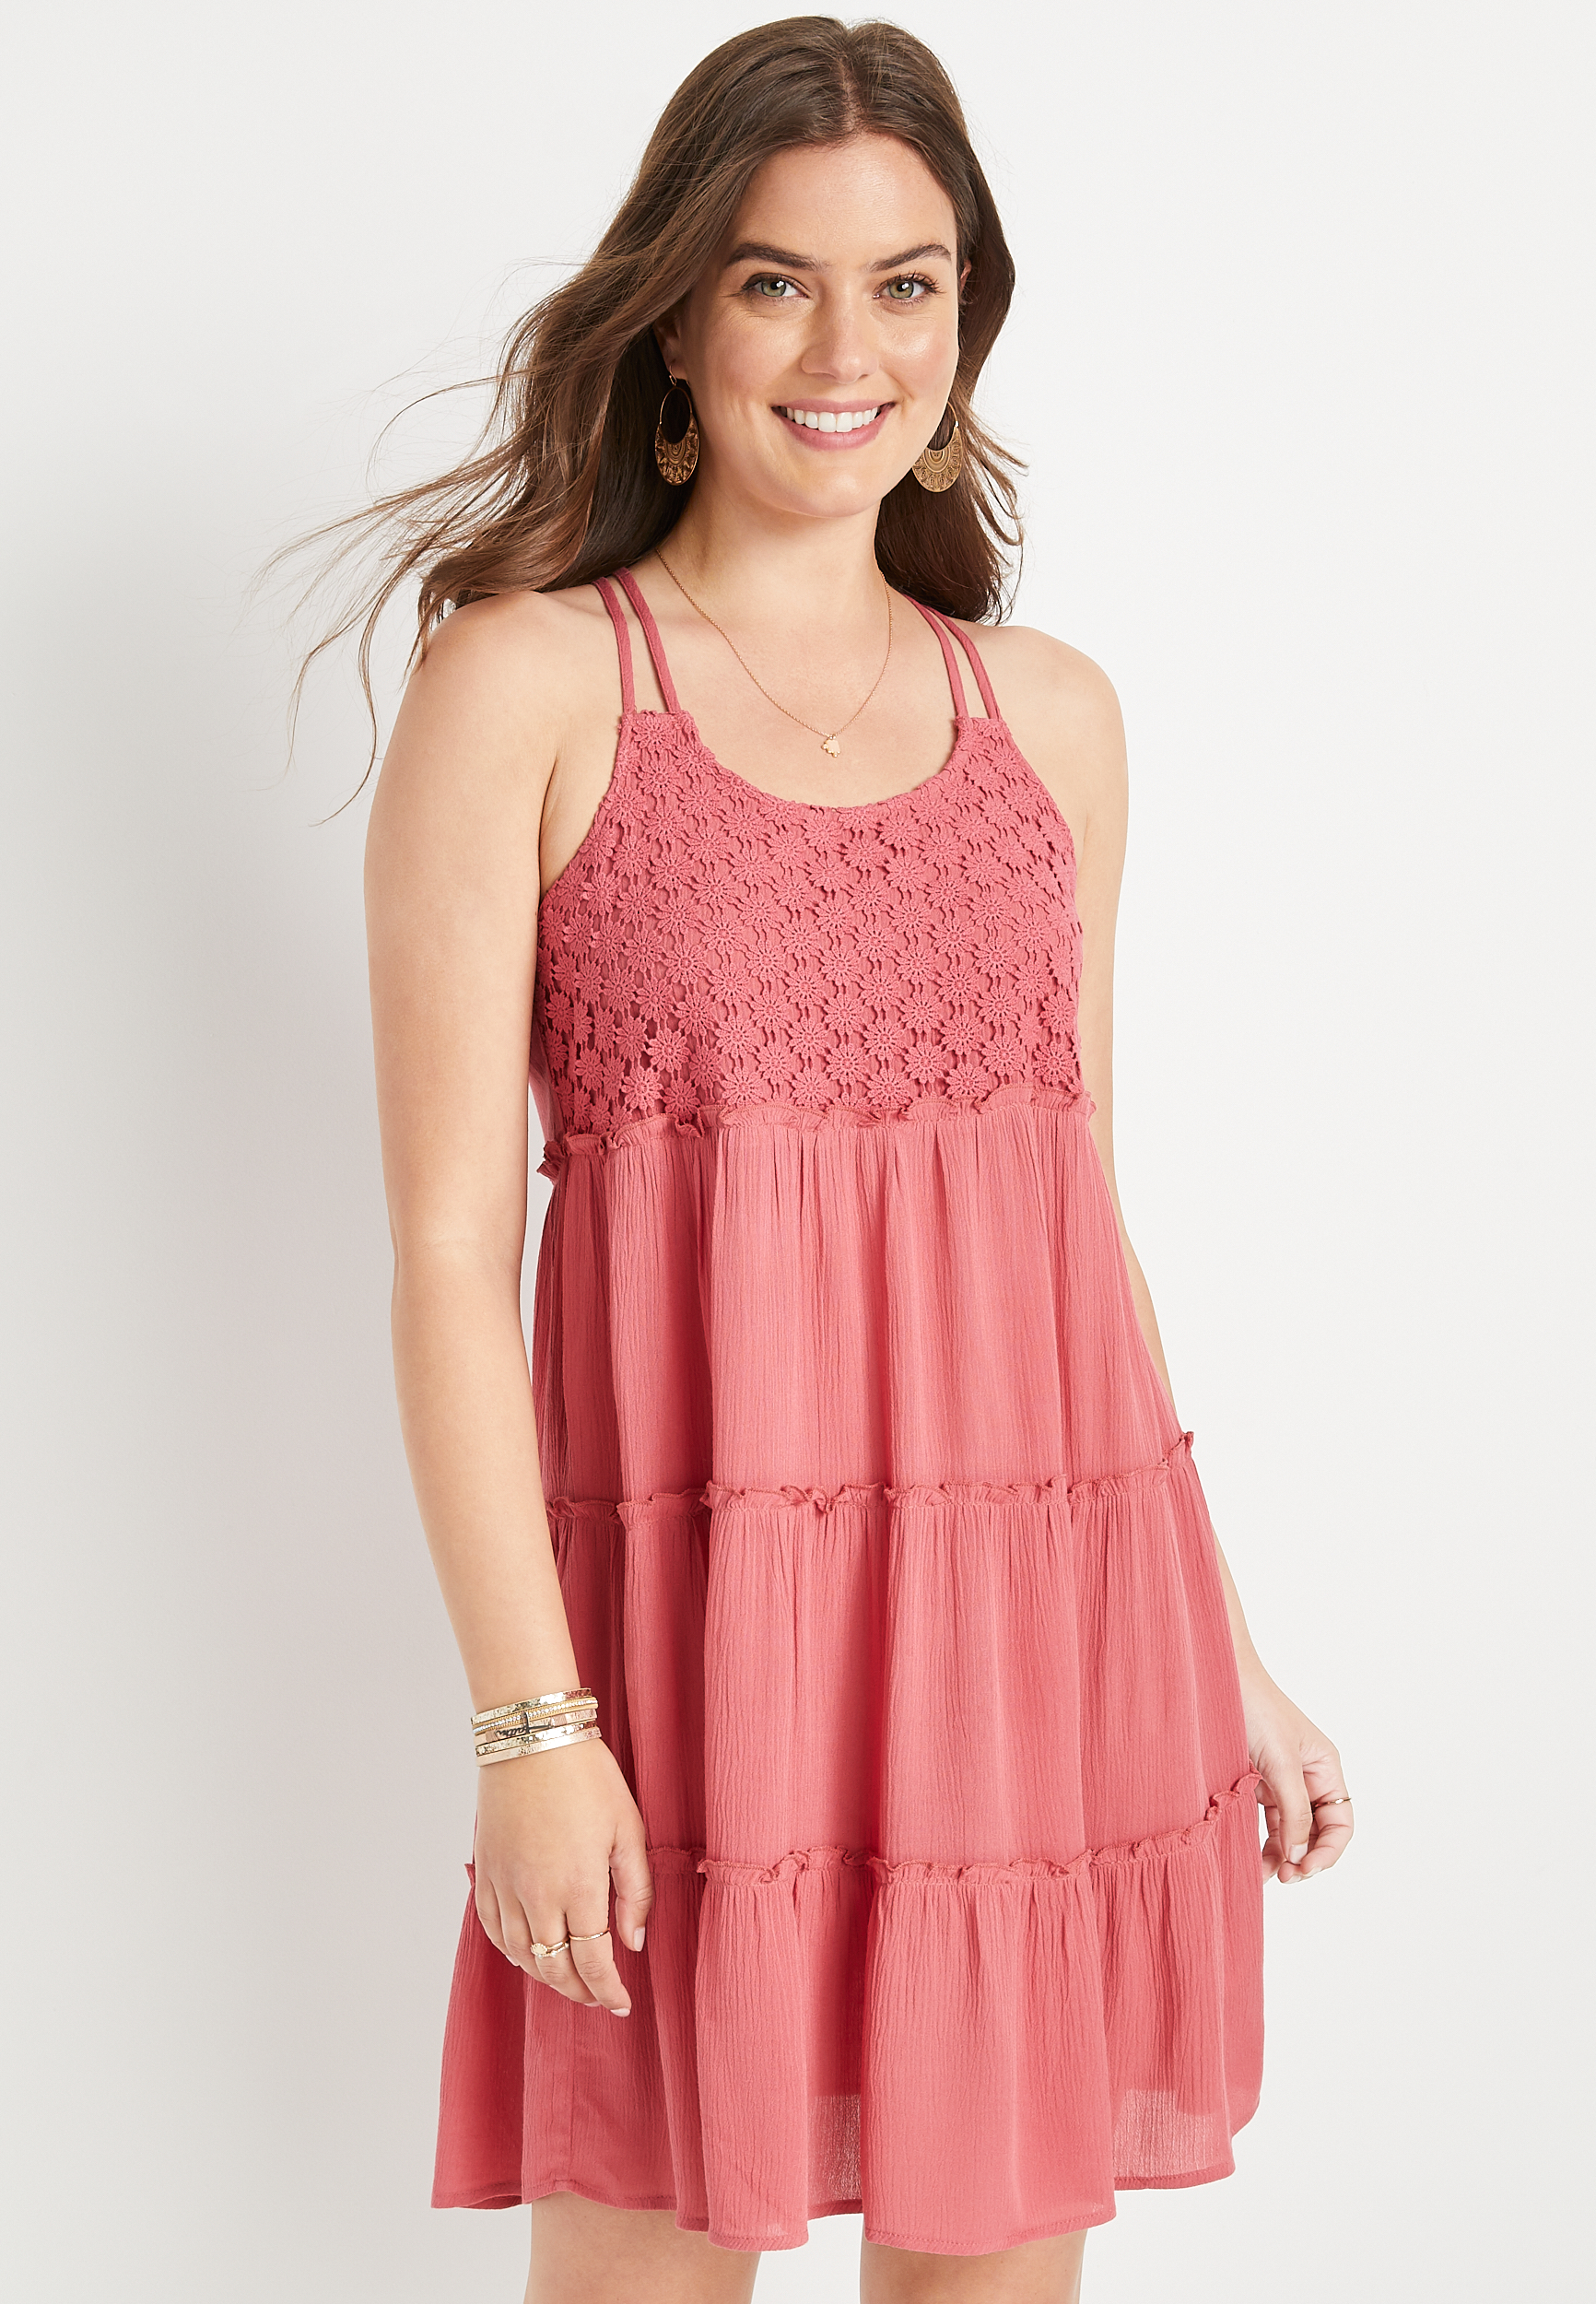 Pink Floral Crochet Babydoll Swing Dress | maurices